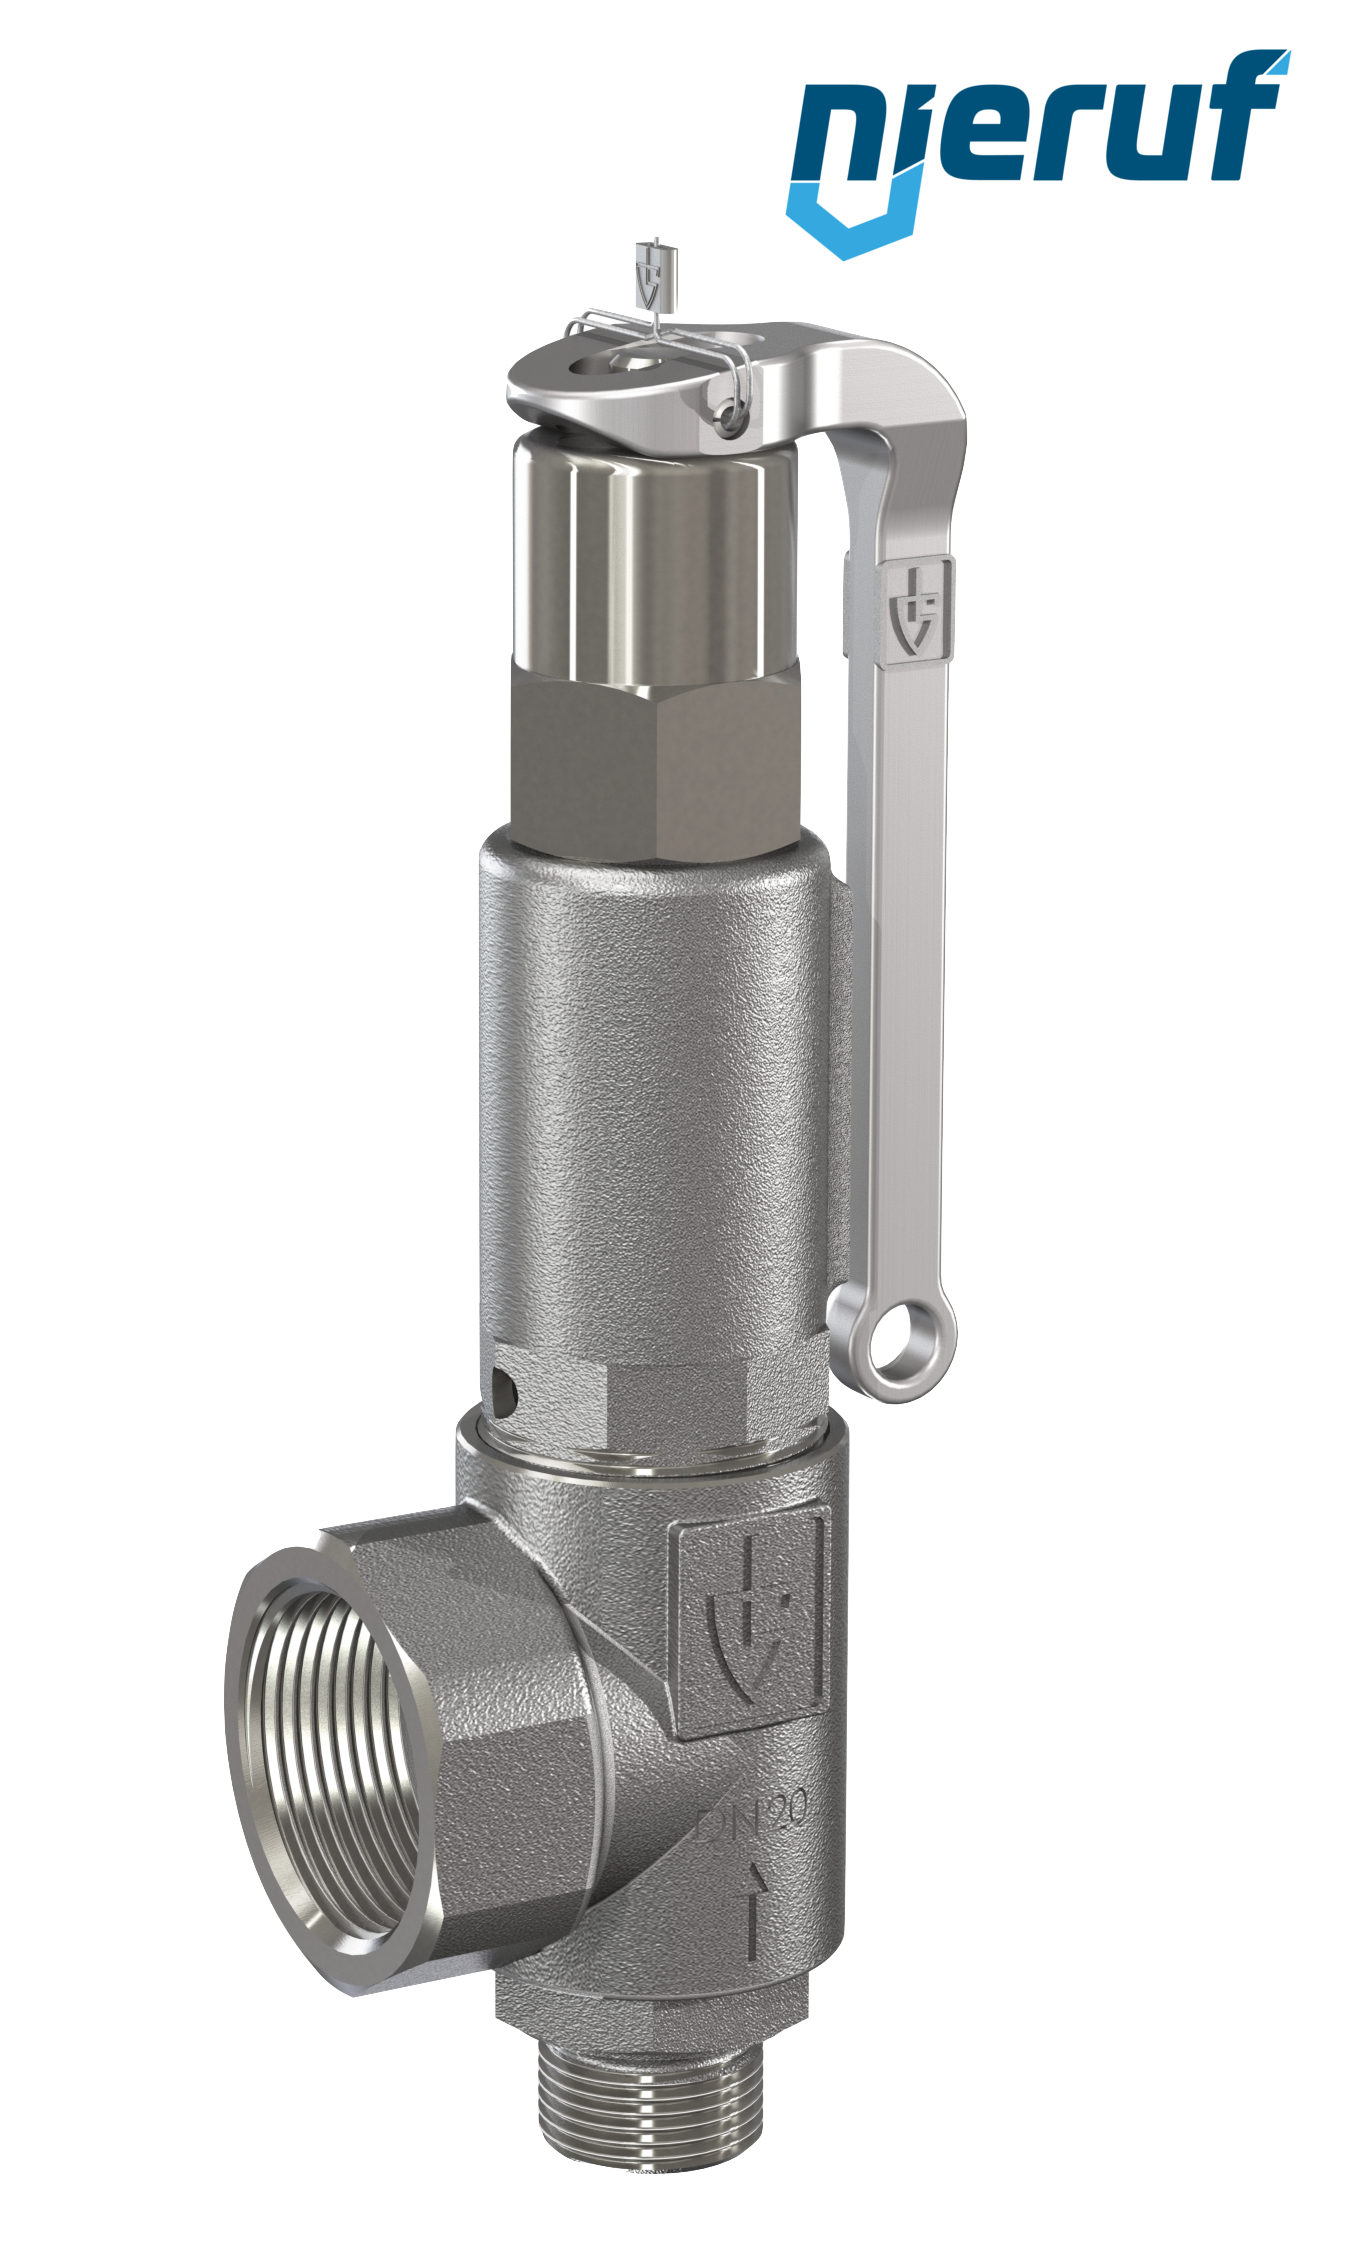 safety valve 1 1/4" m  x 2" fm SV05 neutral liquid media, stainless steel PTFE, with lever